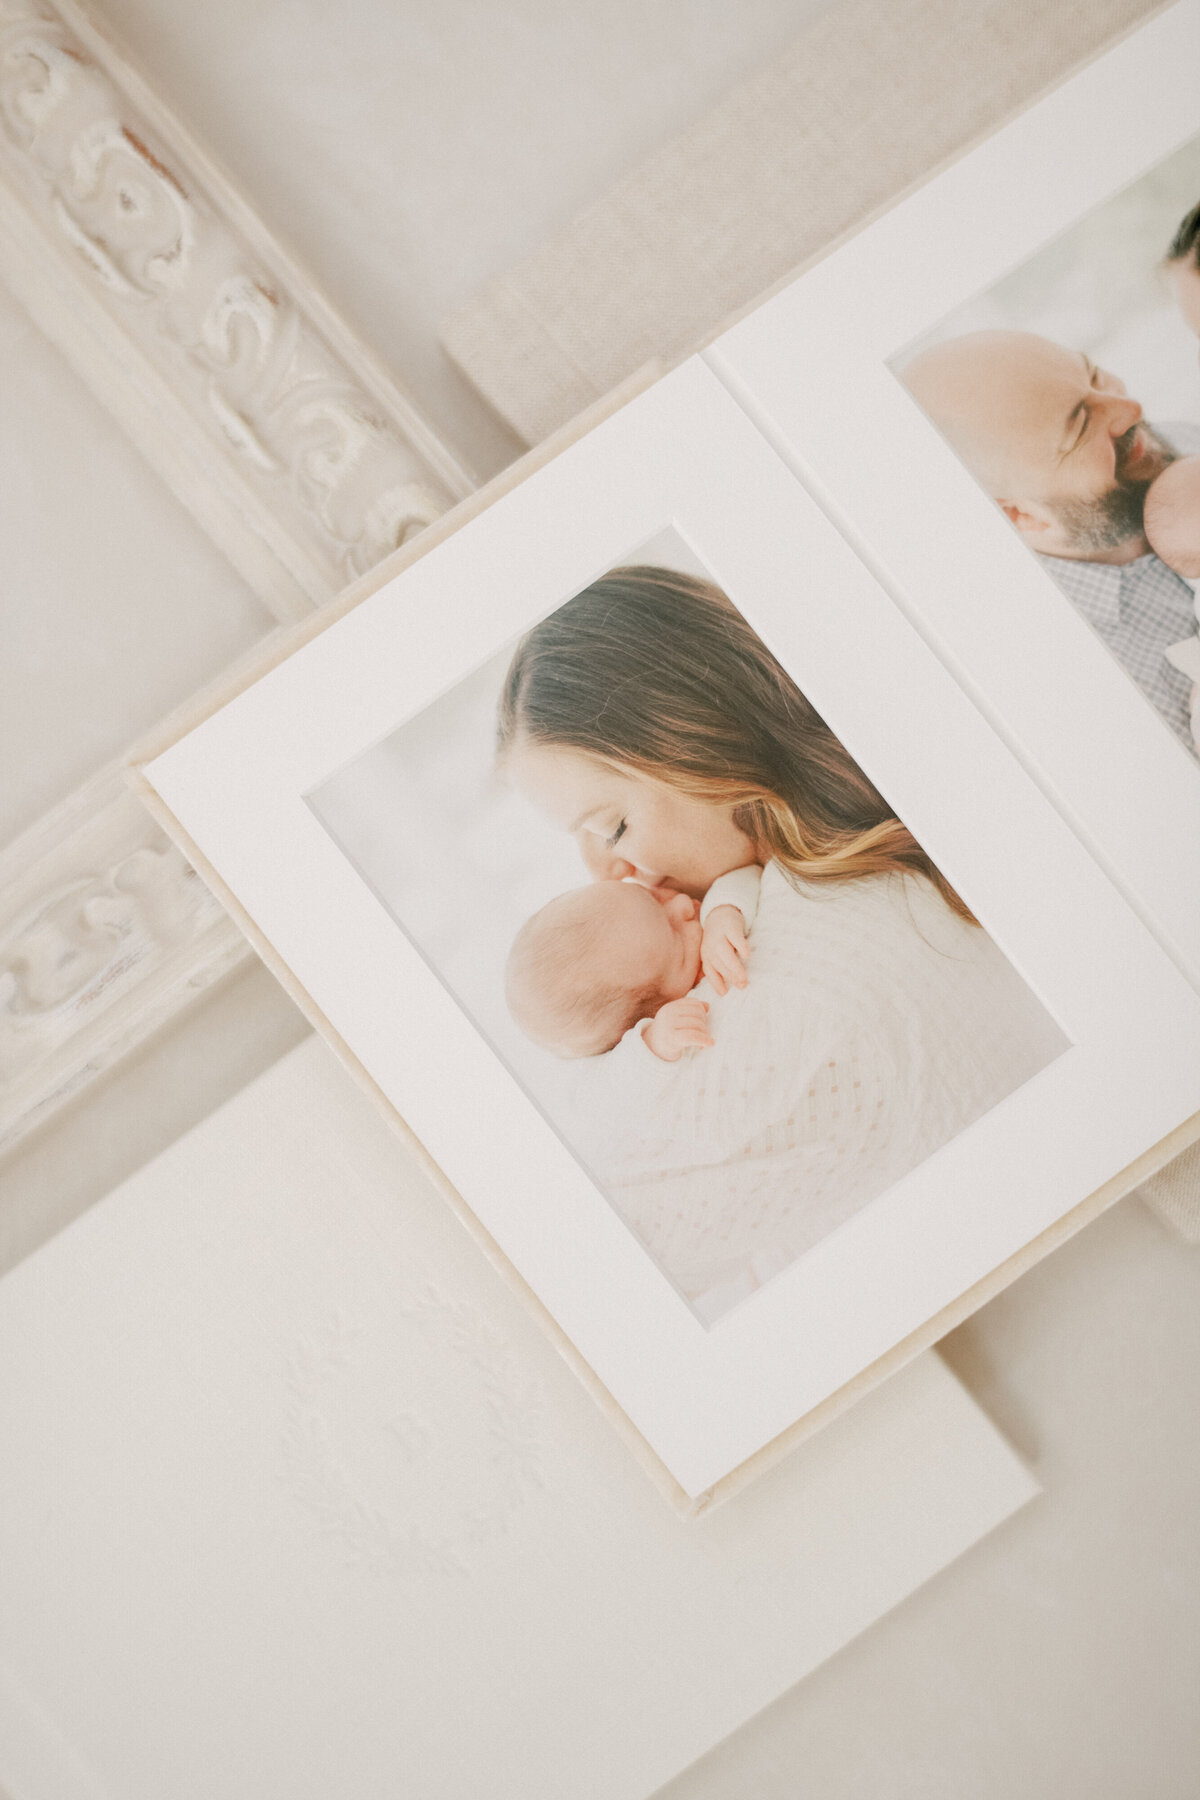 Luxury newborn albums displayed and photographed by Raleigh newborn photographer A.J. Dunlap Photography